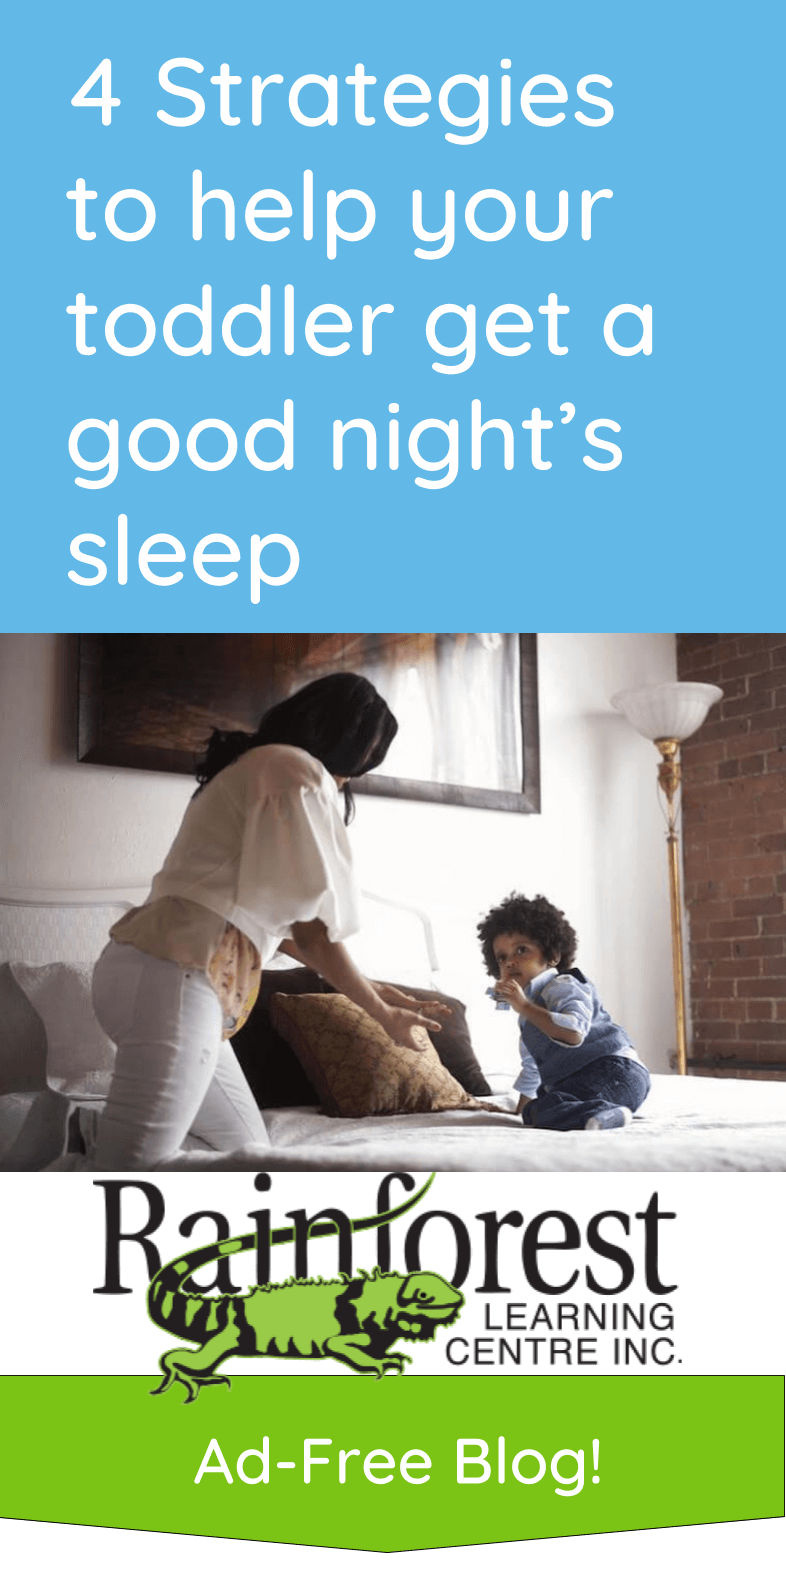 4 Strategies to help your toddler get a good night’s sleep article - pinterest image